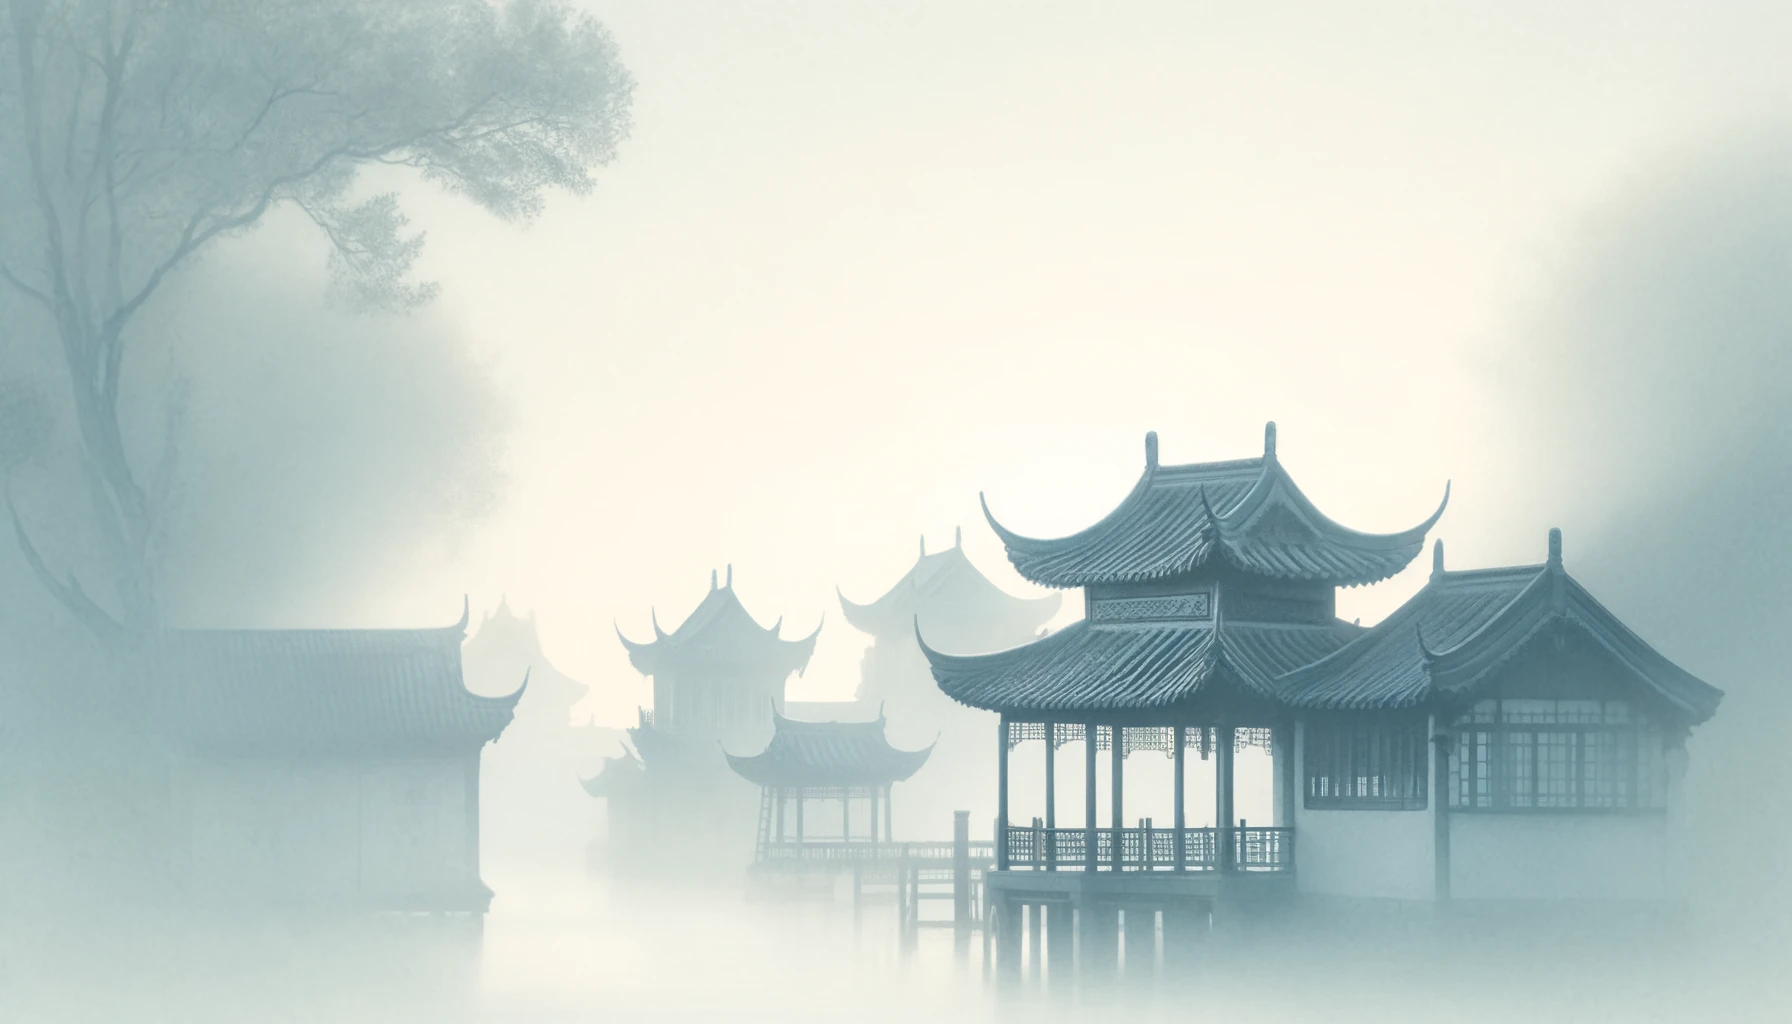 Serene Chinese landscape in soft white hues, featuring traditional buildings silhouettes in a 16:9 aspect ratio, perfect for enhancing the visual appeal of content focused on historical Chinese architecture and design aesthetics.